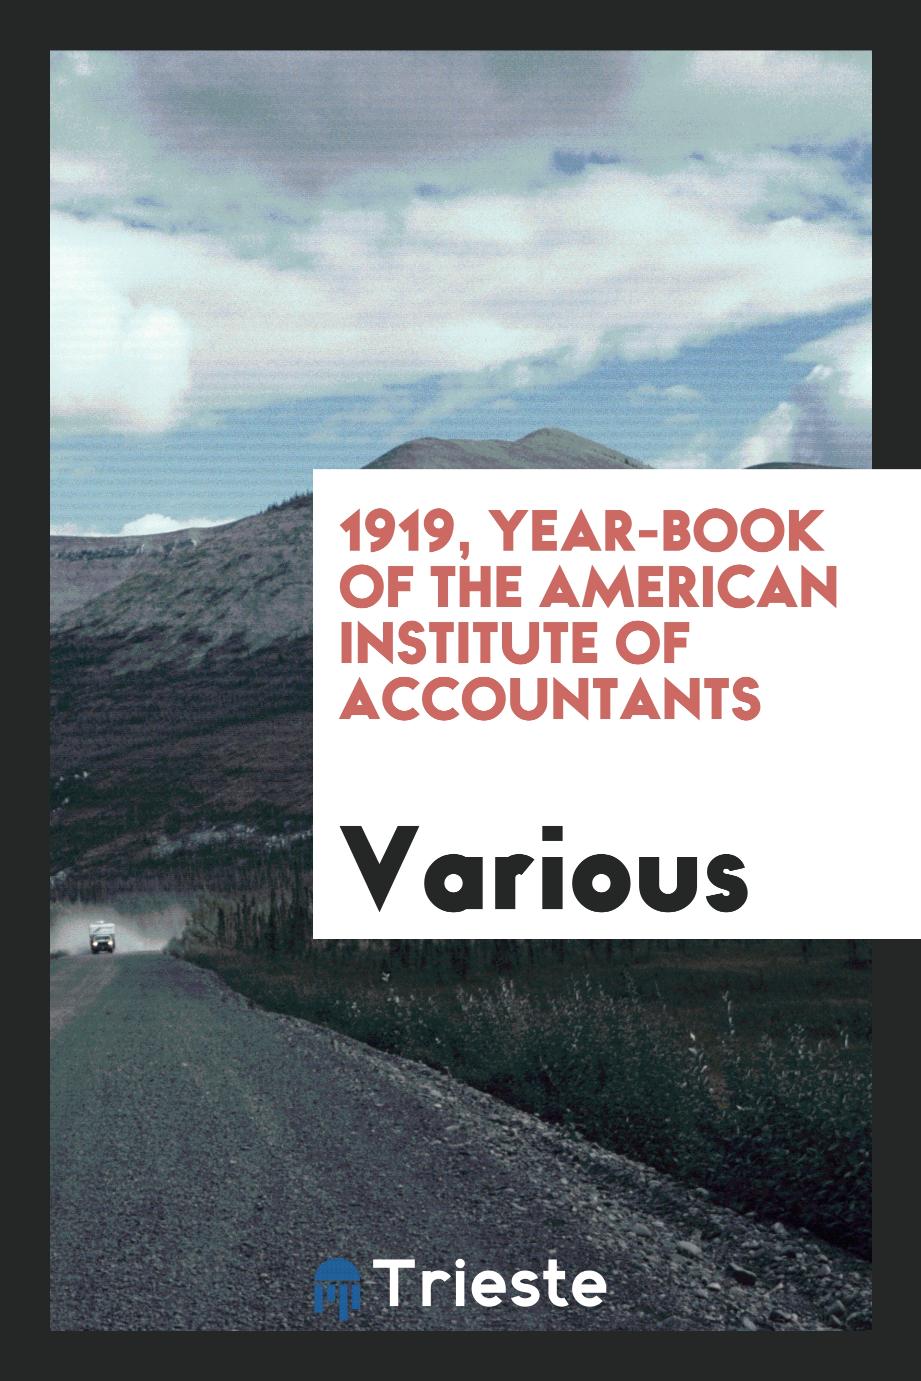 1919, Year-Book of the American Institute of Accountants